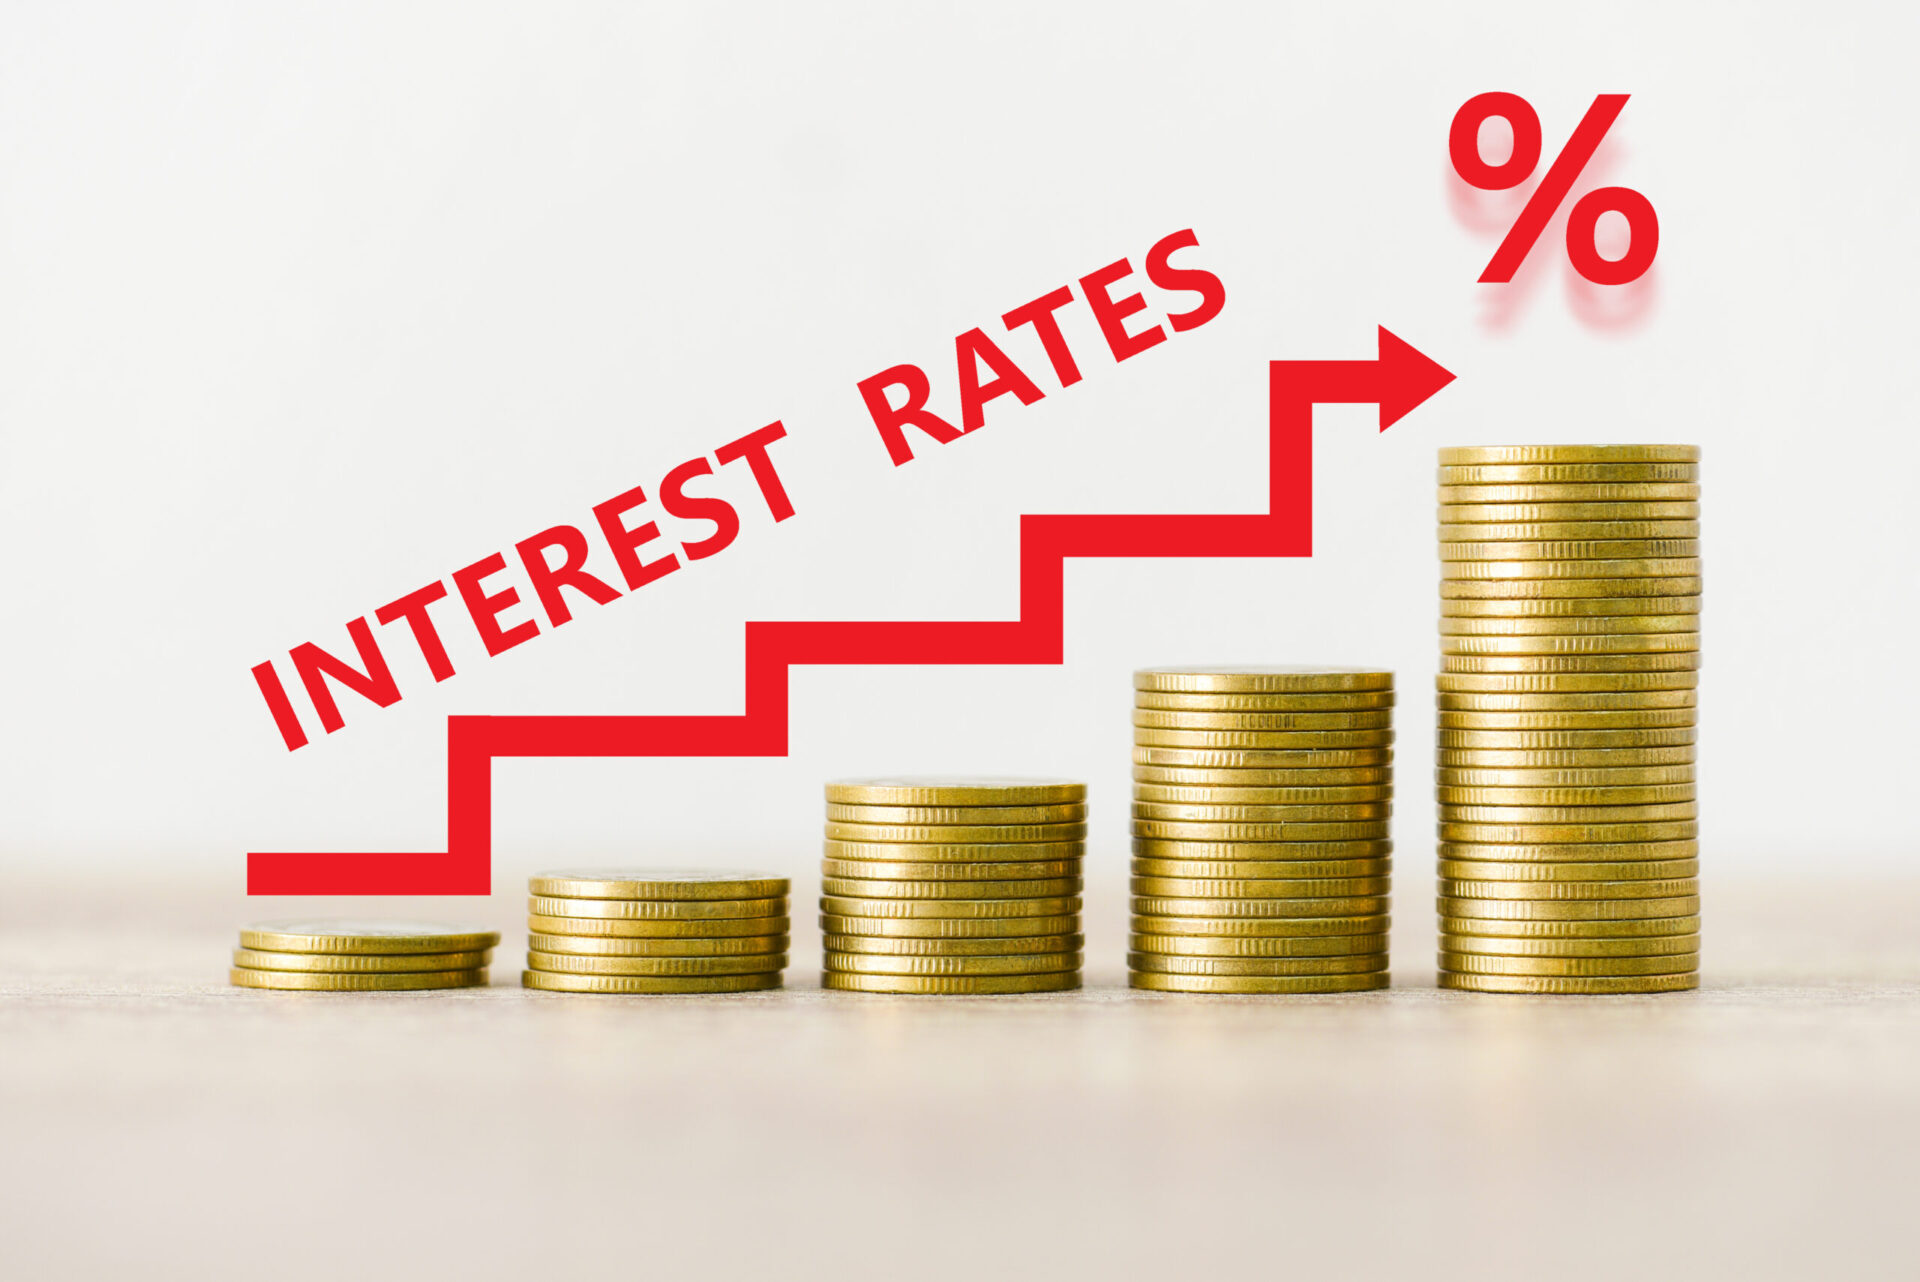 Economist Interest Rates Will Go Up in 2022, Rise Even More in 2023